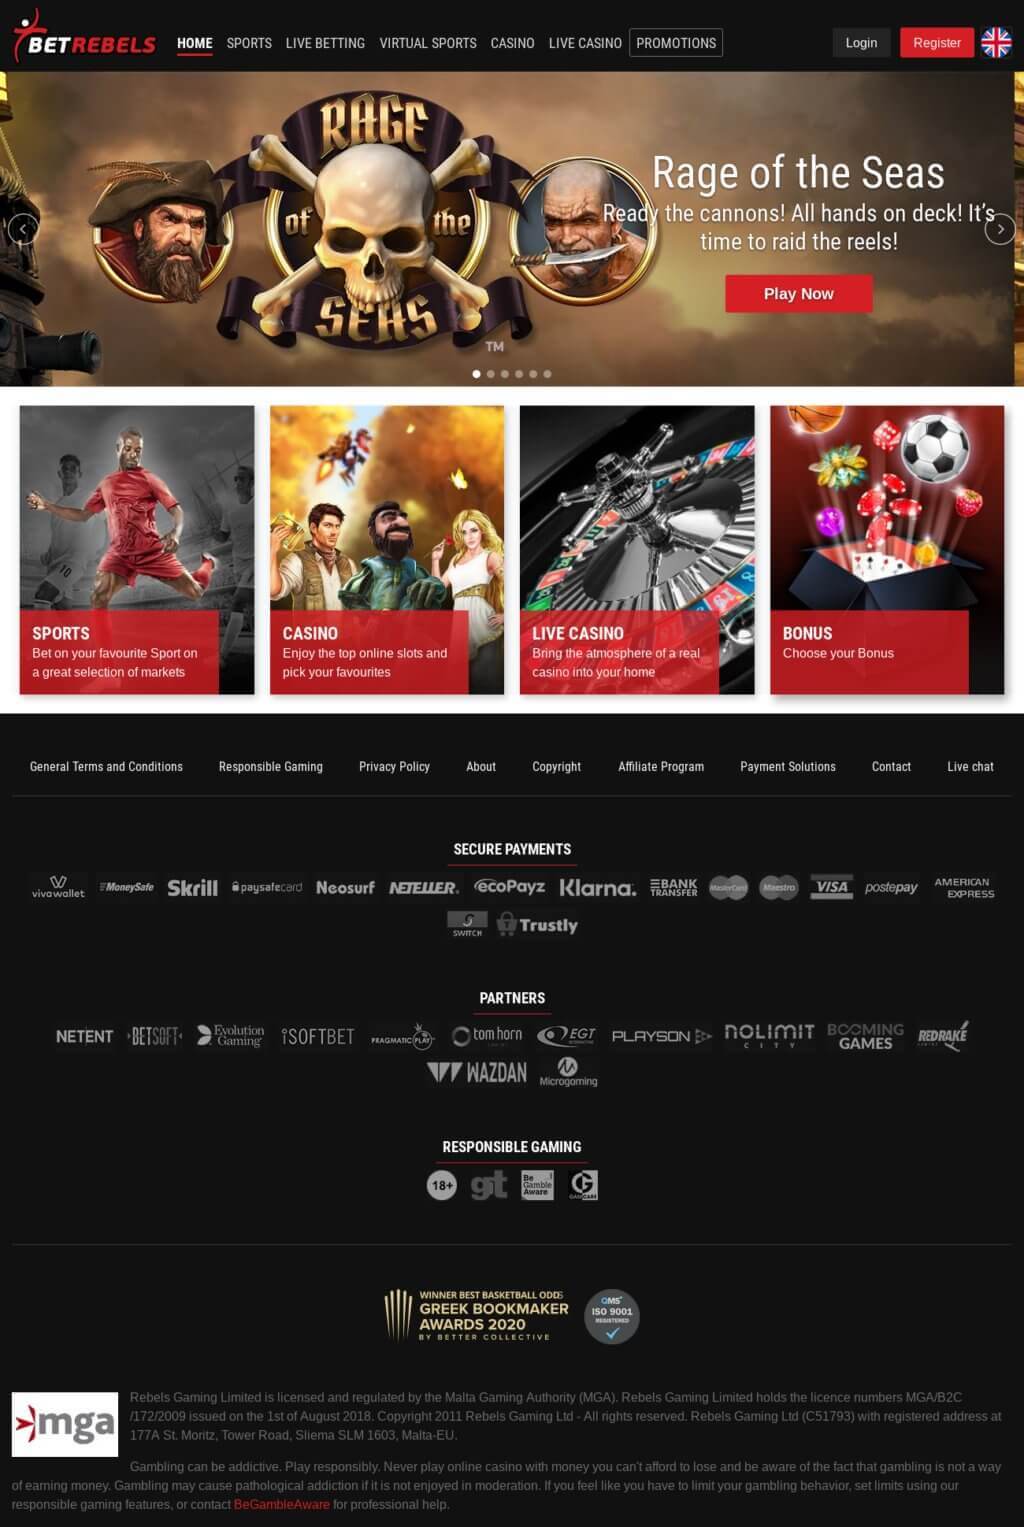 BetRebels Casino Sports betting and online casino games